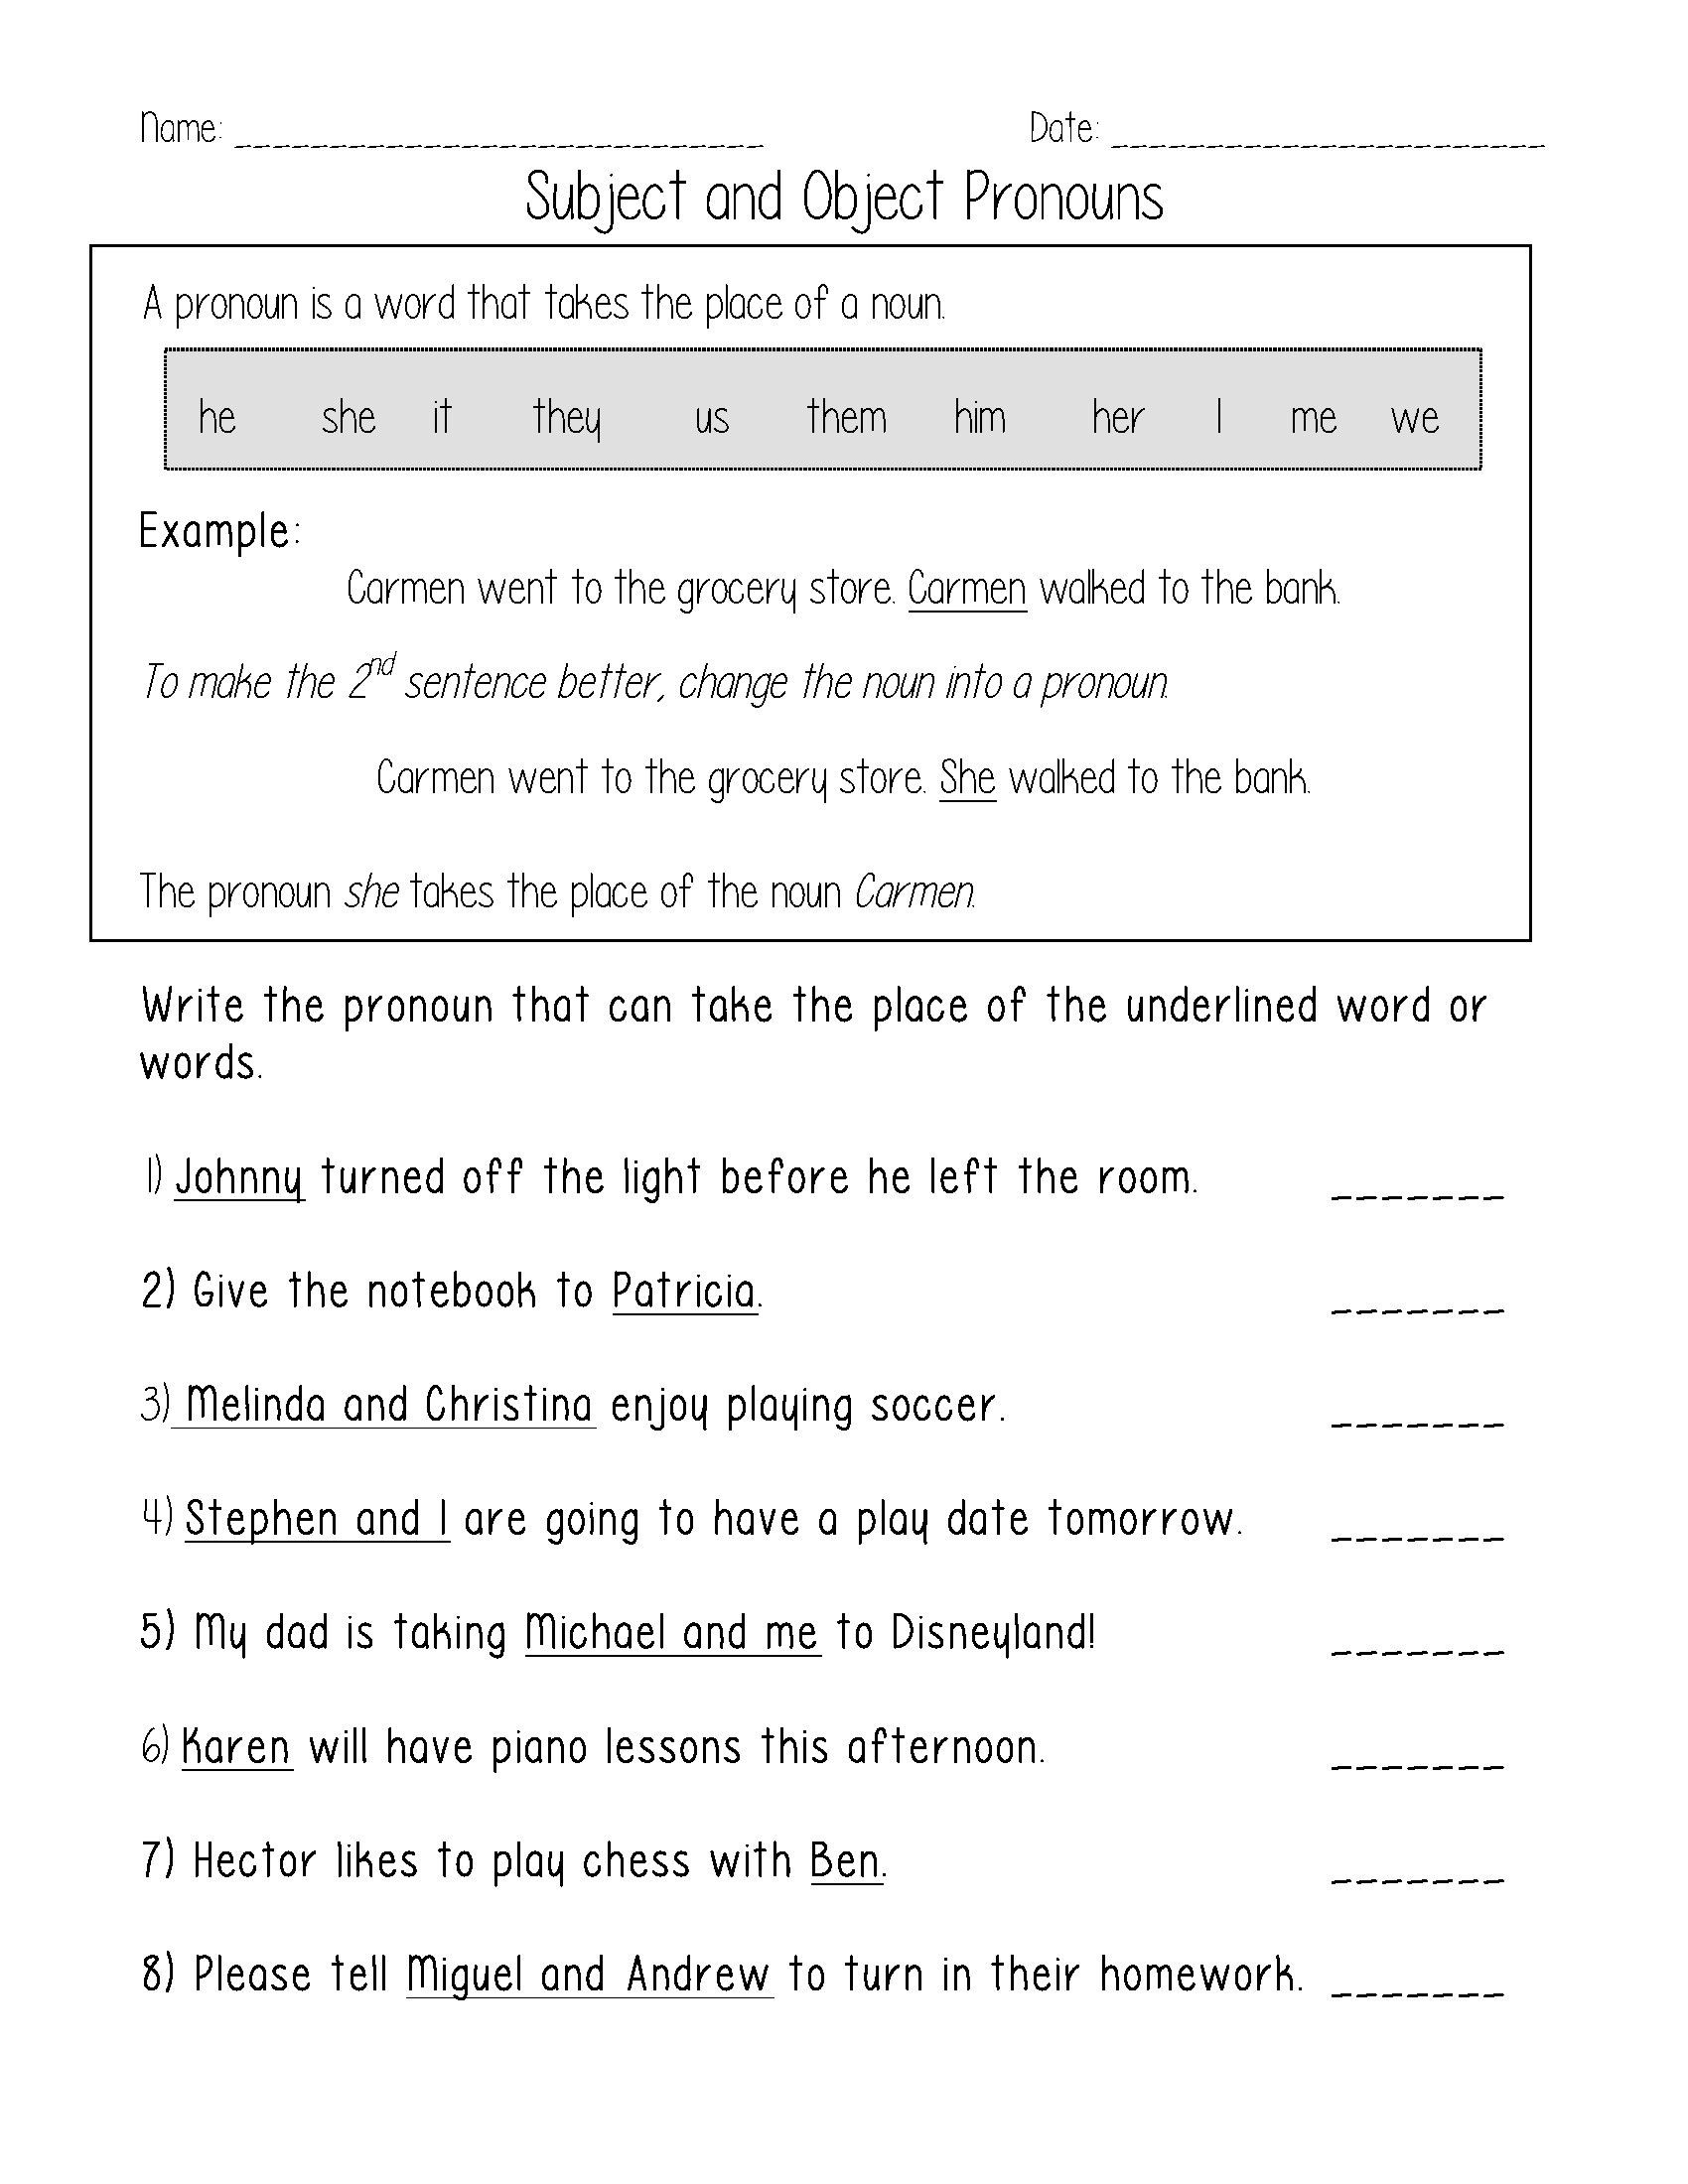 Second Grade Pronoun Worksheets 2nd Grade Esl Worksheet Valid Subject and Object Pronouns